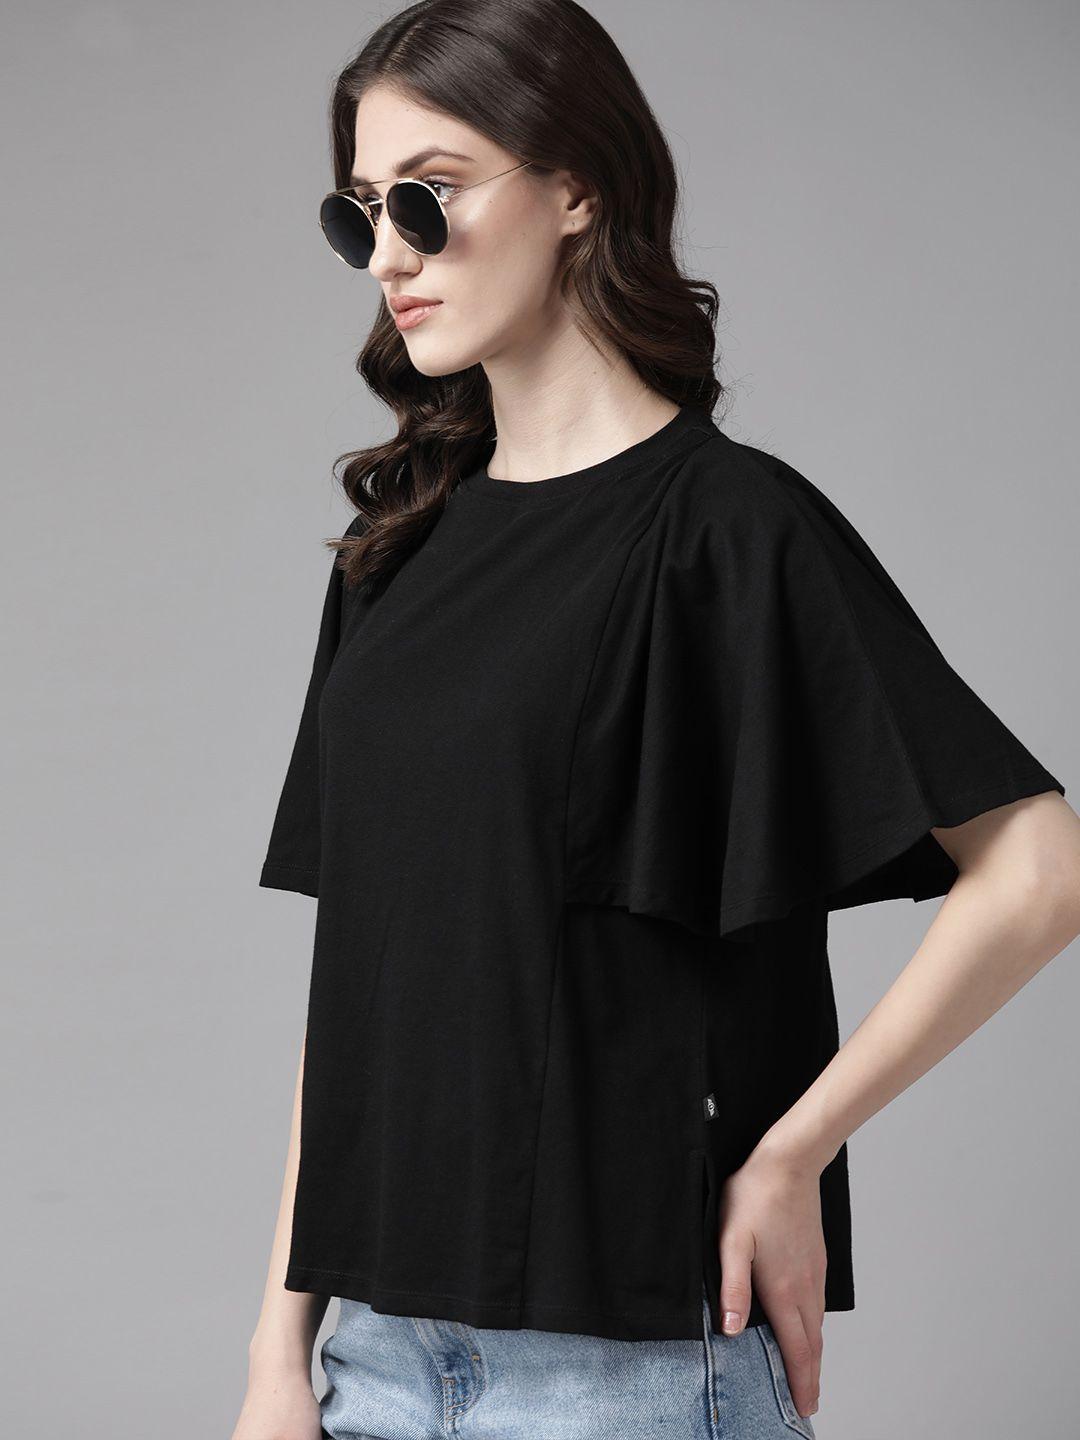 the roadster lifestyle co. boxy fit flutter sleeves t-shirt